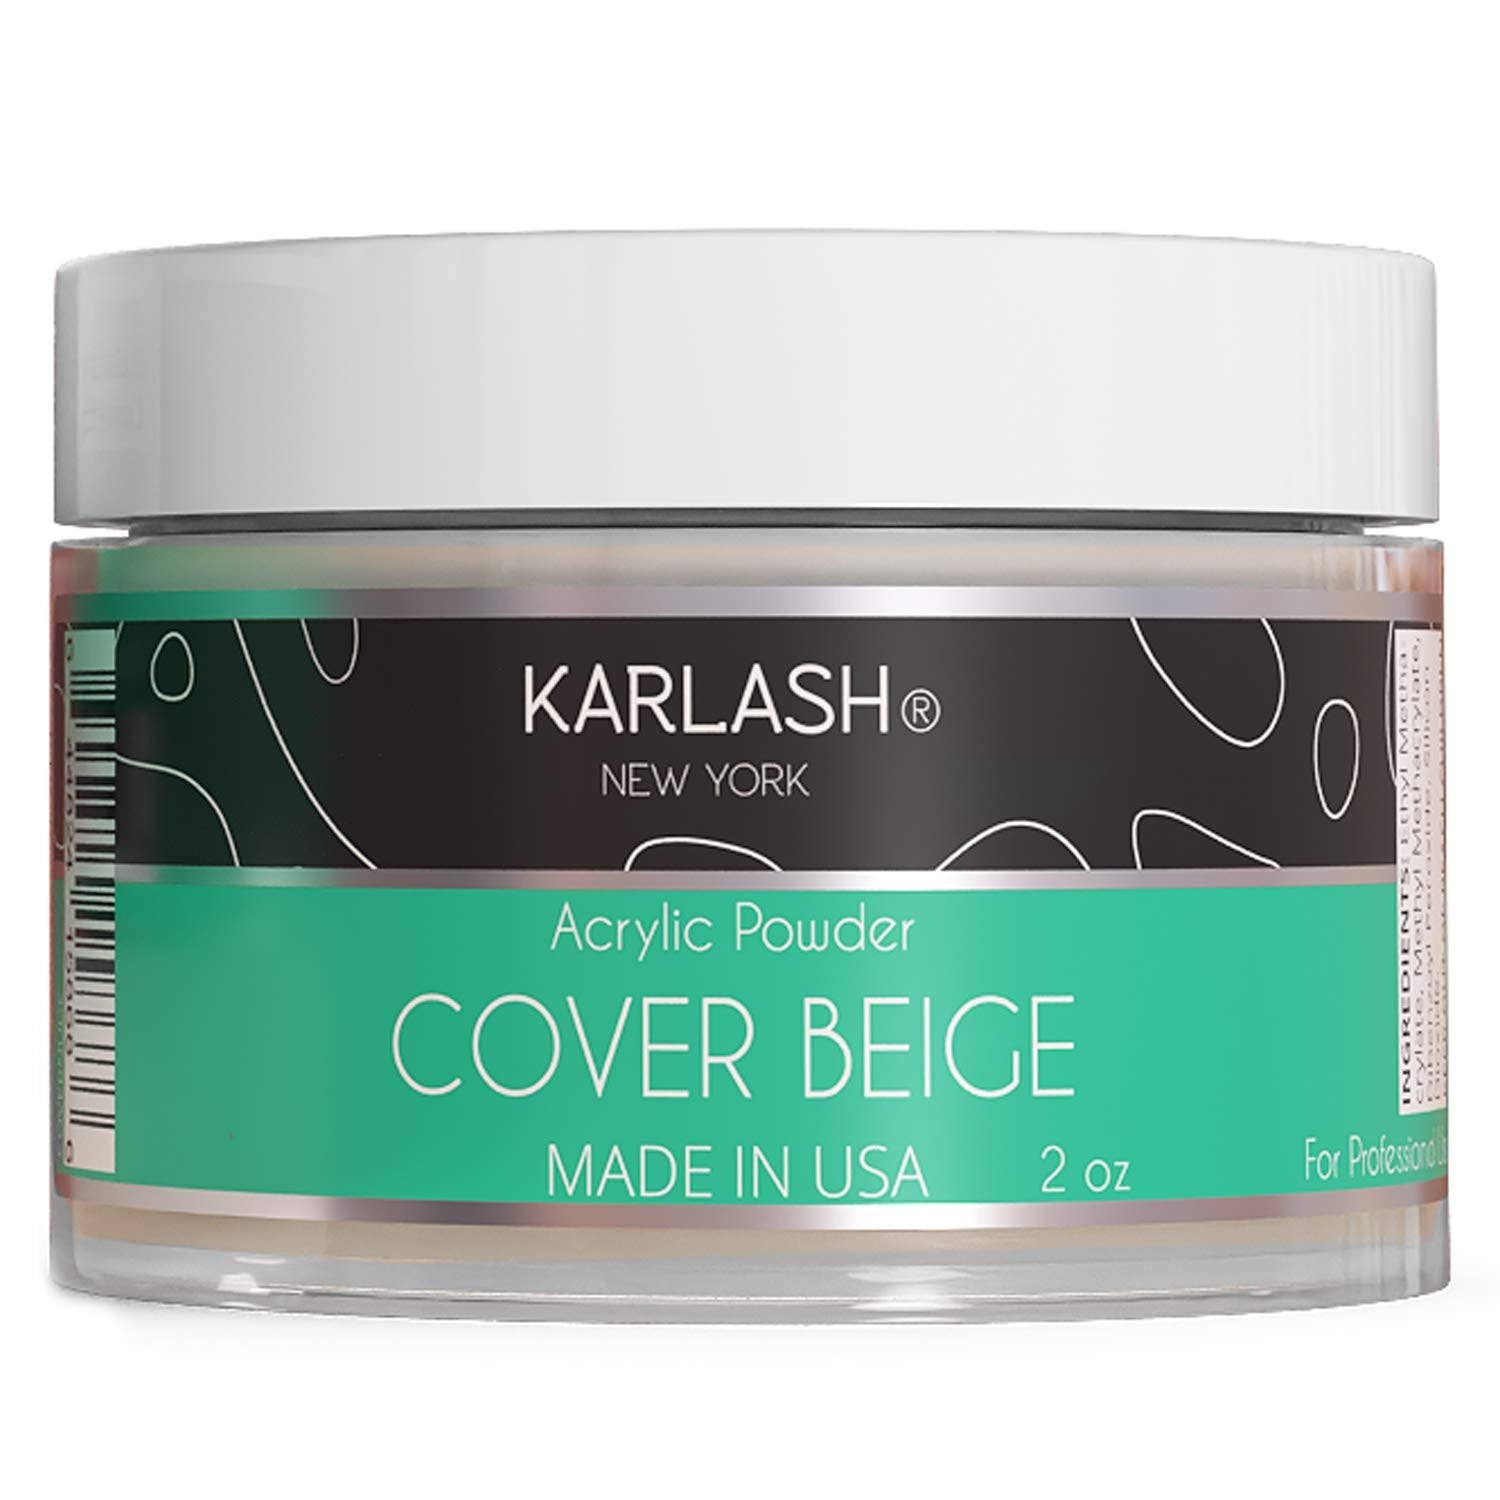 Karlash Professional Acrylic Powder Cover Beige 2 oz Made in USA